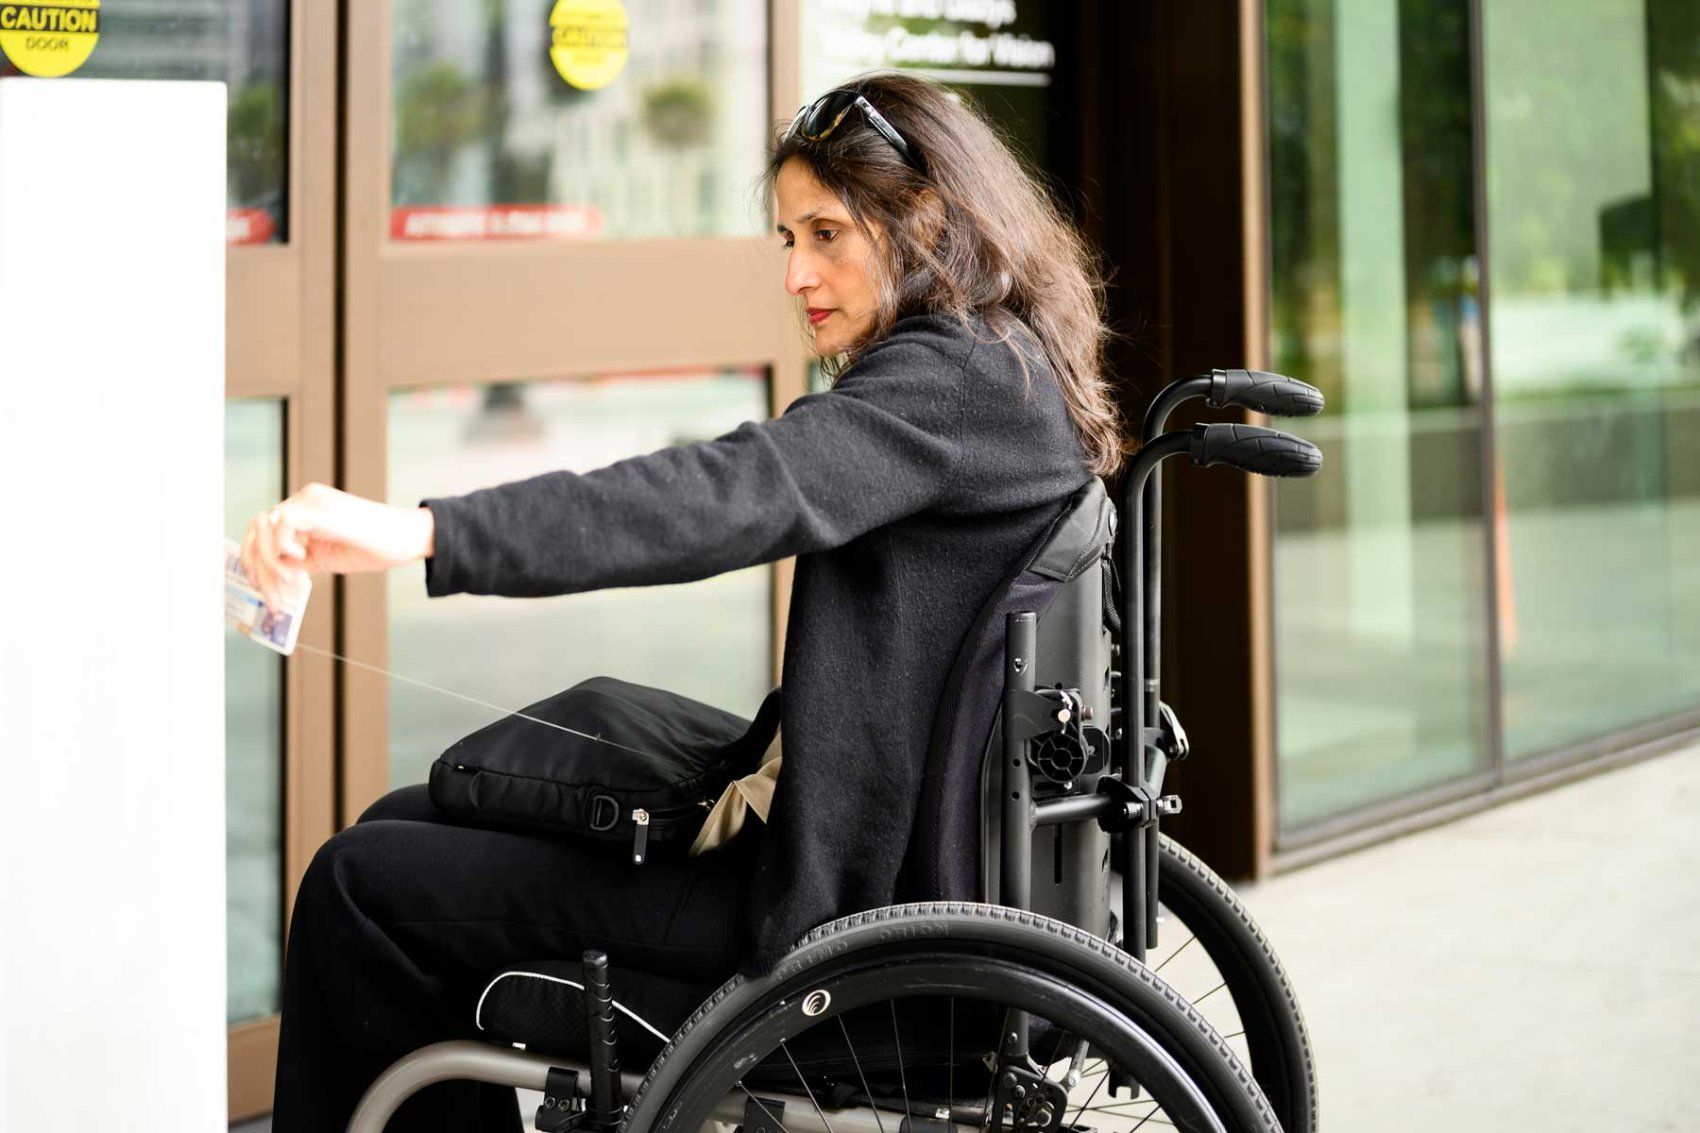 Janhavi Bonville swipes her credentials to enter a building in her wheelchair.